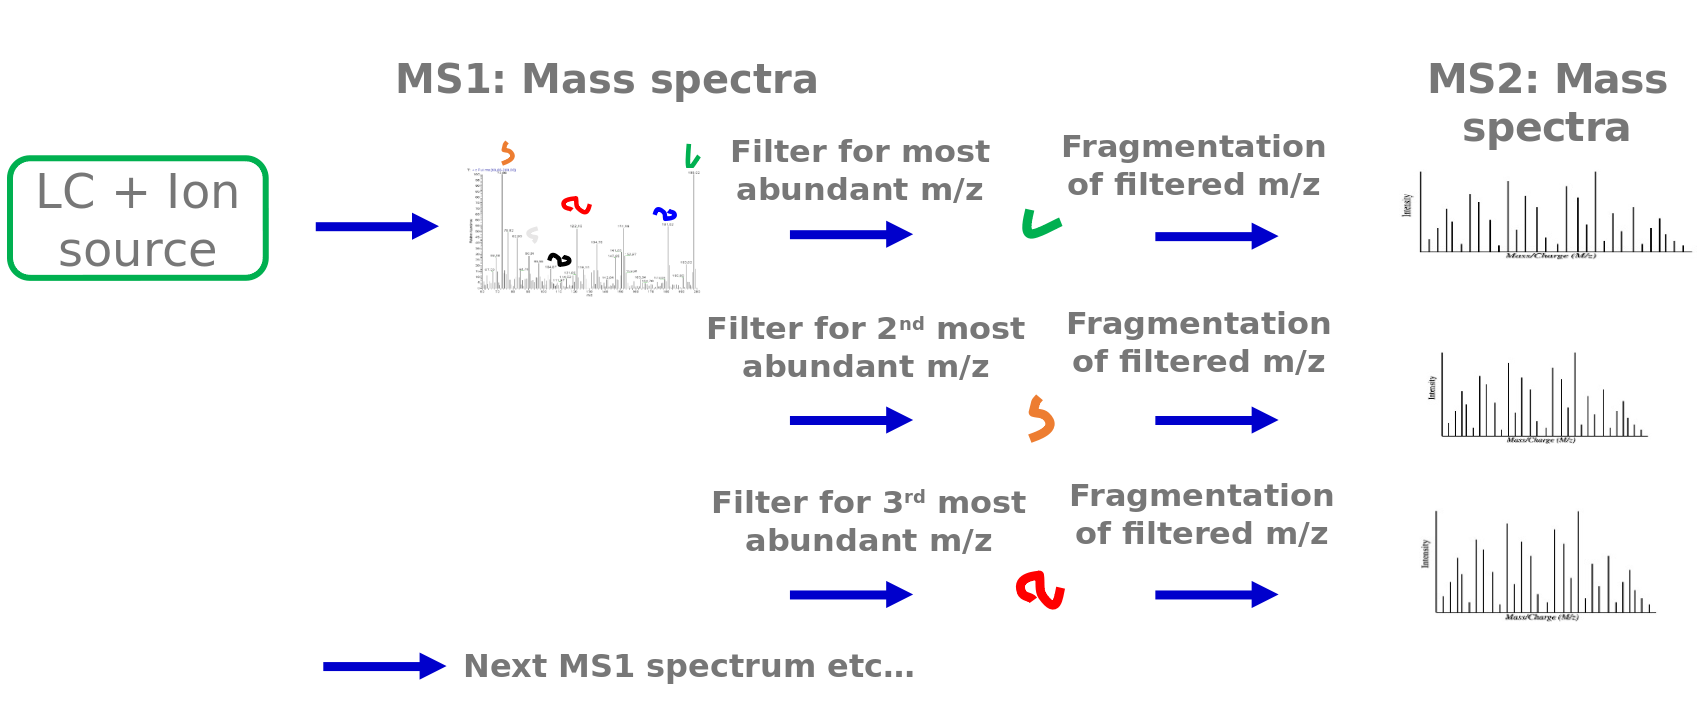 an LC+Ion source goes into ms1: mass spectra which are filtered for most abundant m/z, then fragmentation of filtered m/z produces an MS2: Mass spectra. This process is repeated for the 2nd and 3rd most abundant m/z and so on.